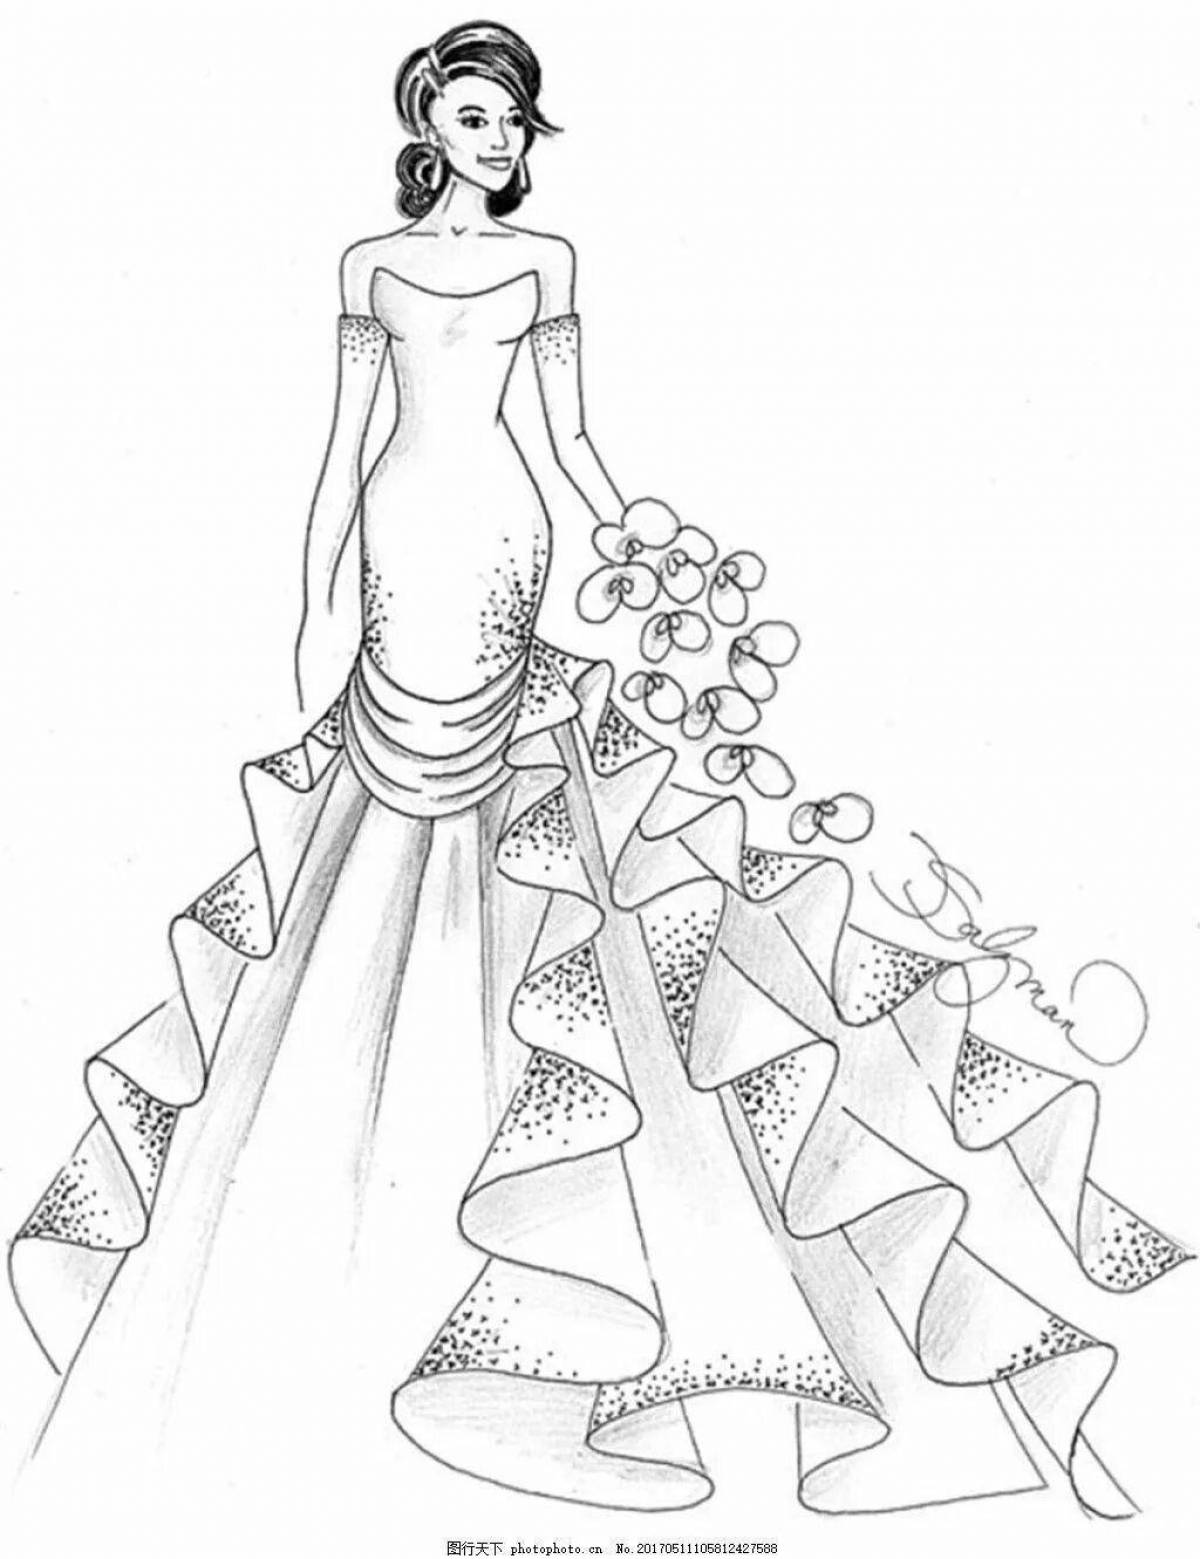 Sparkly puffy dress coloring book